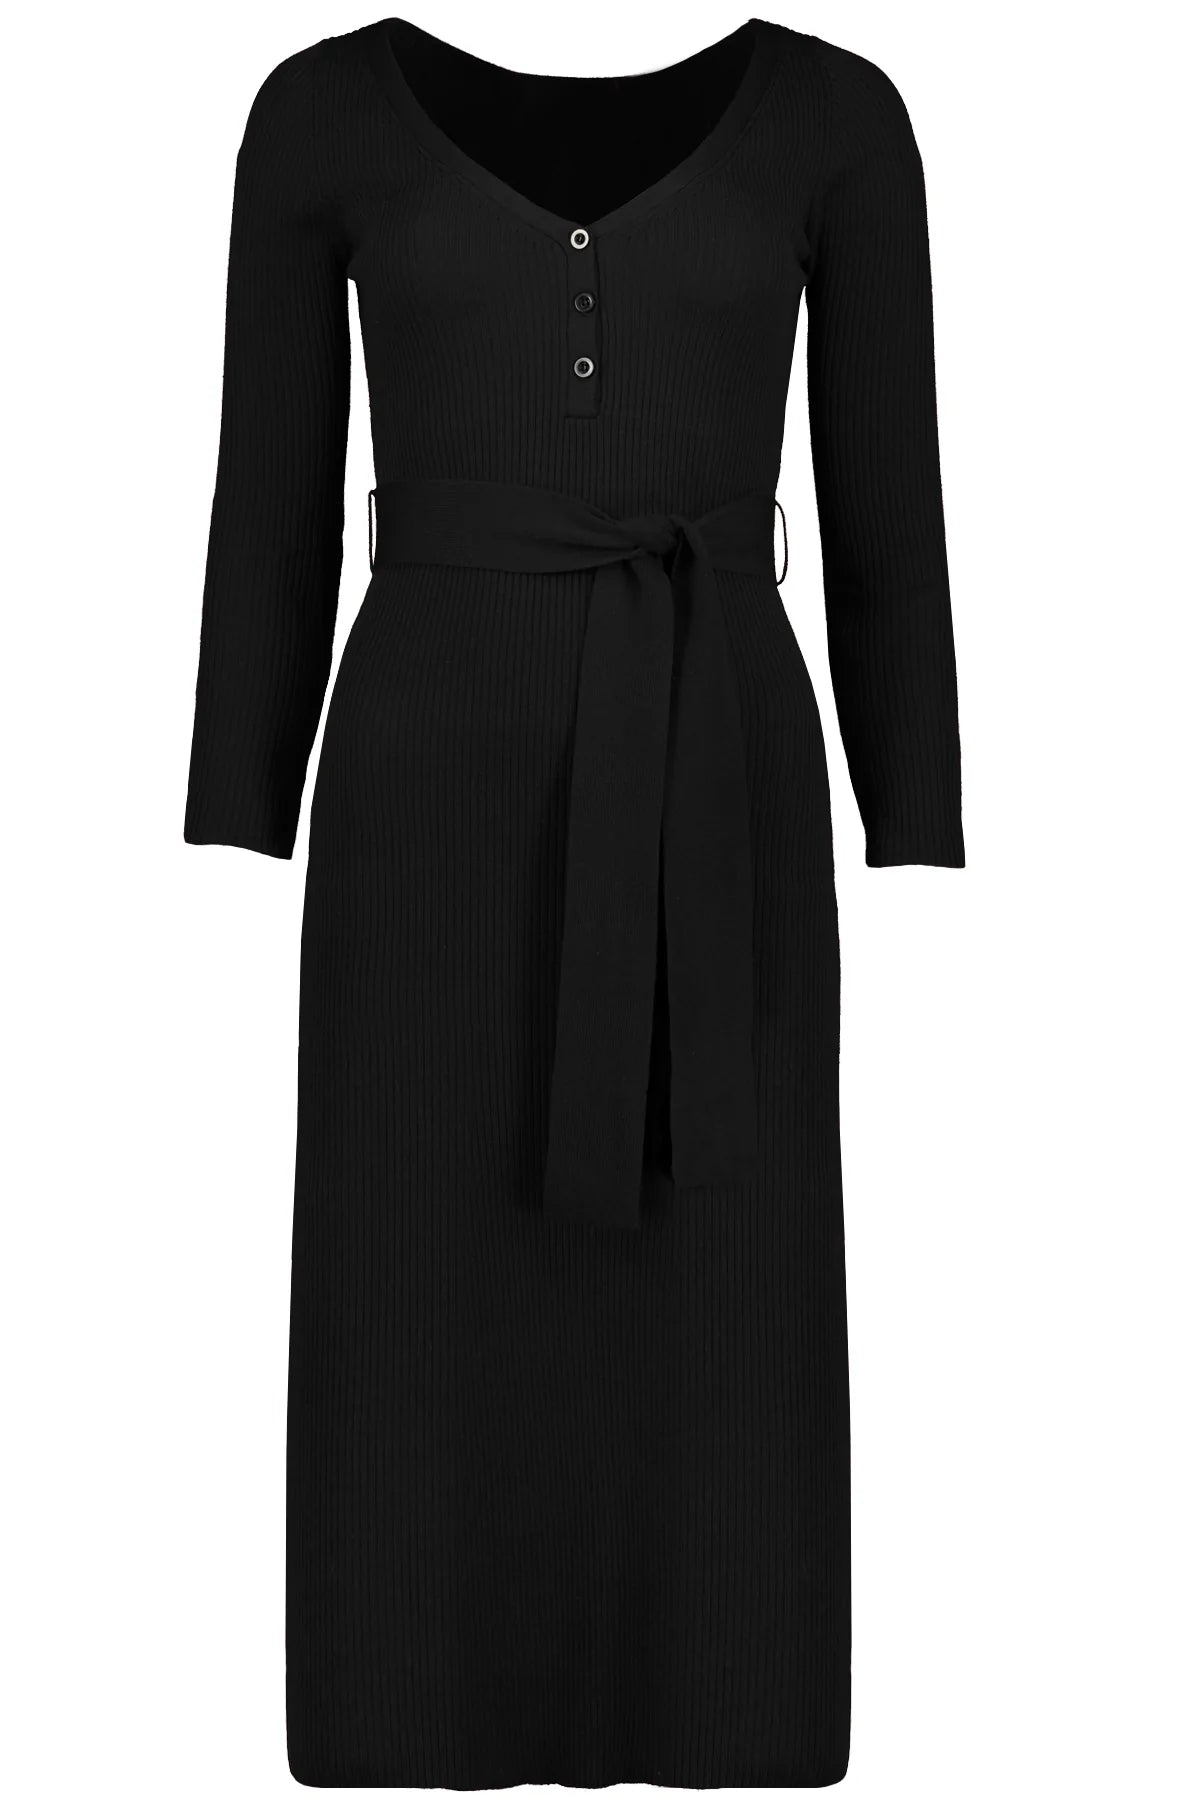 Bishop + Young Black Henley Sweater Dress